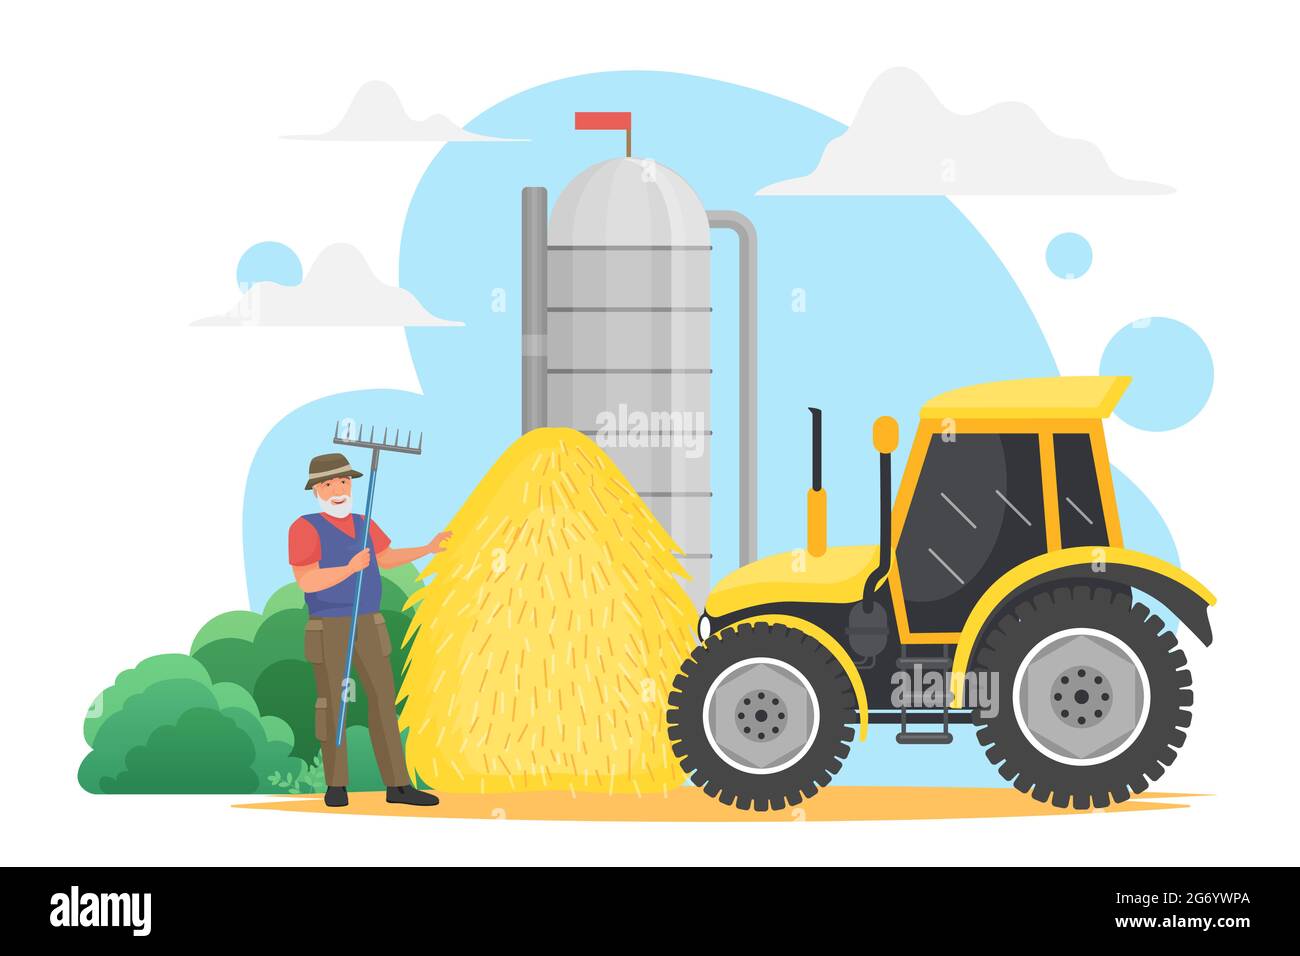 Farmer people work in village, grain harvest agriculture technology vector illustration. Cartoon happy elderly man worker character holding pitchfork, standing near farm silo tank storage and tractor Stock Vector